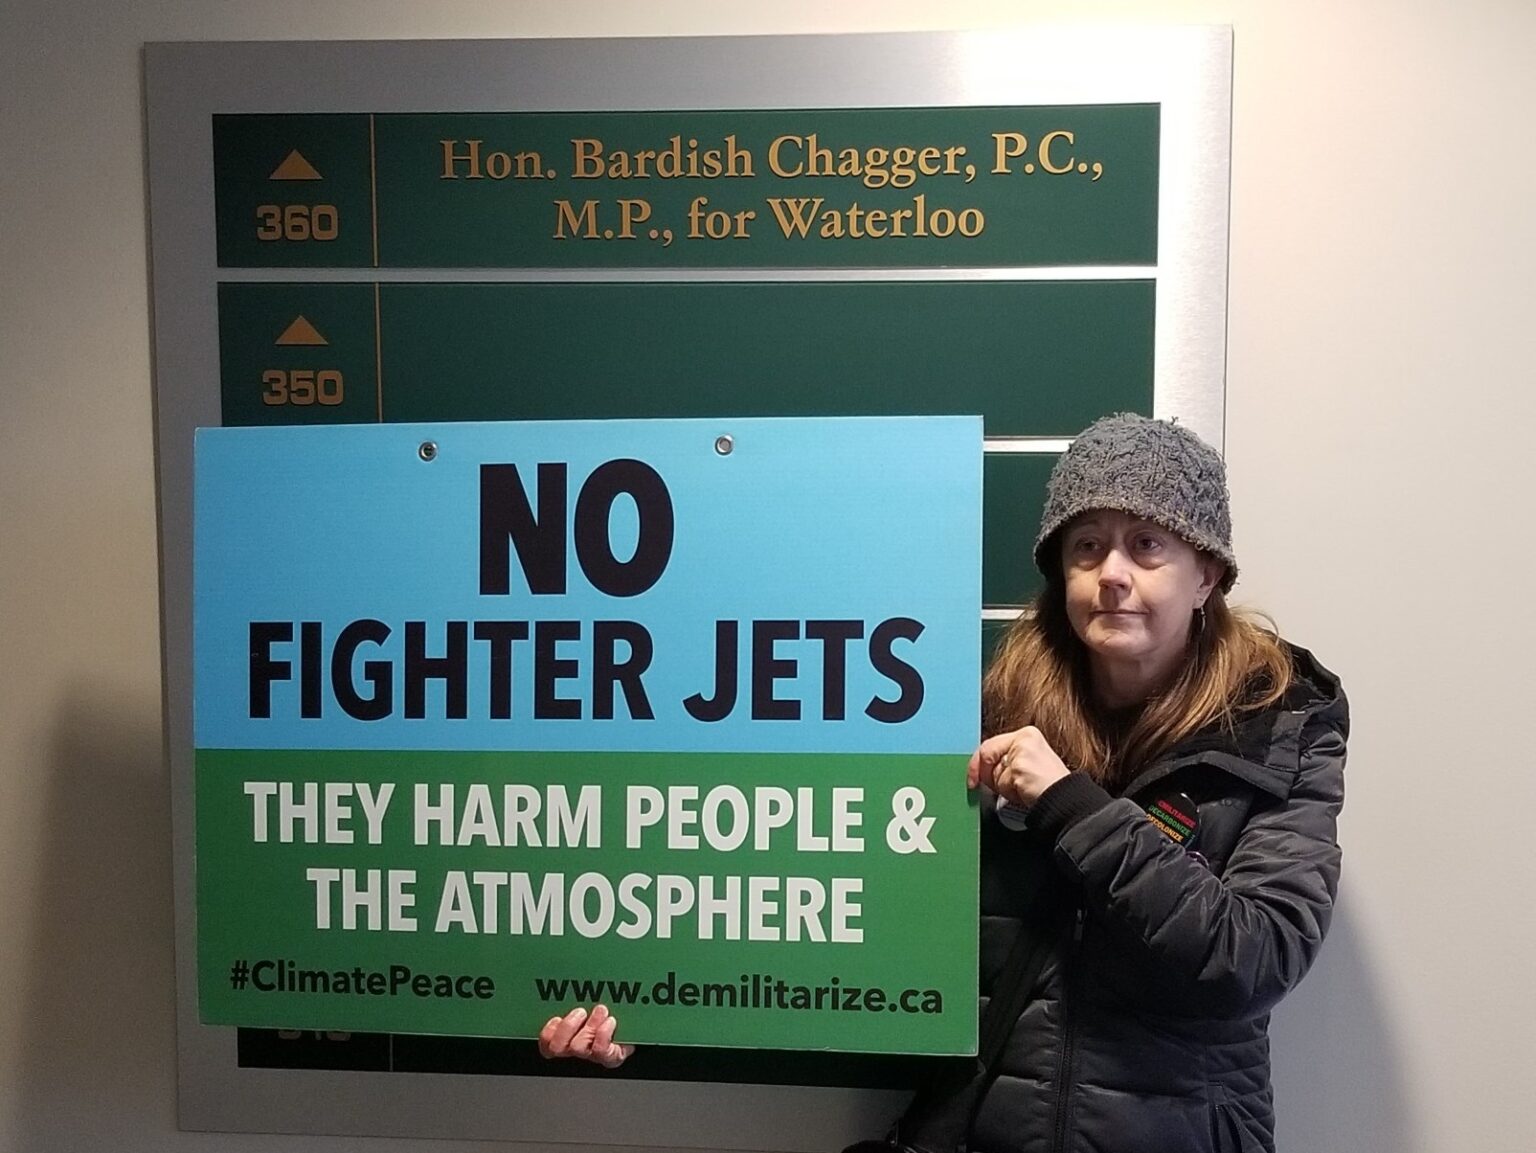 (Tamara Lorincz in front of a sign indicating "Hon. Bardish Chagger, P.C. | M.P. for Waterloo", holding a sign that reads "No Fighter Jets | They Harm People & The Atmosphere | #ClimatePeace www.demilitarize.ca)